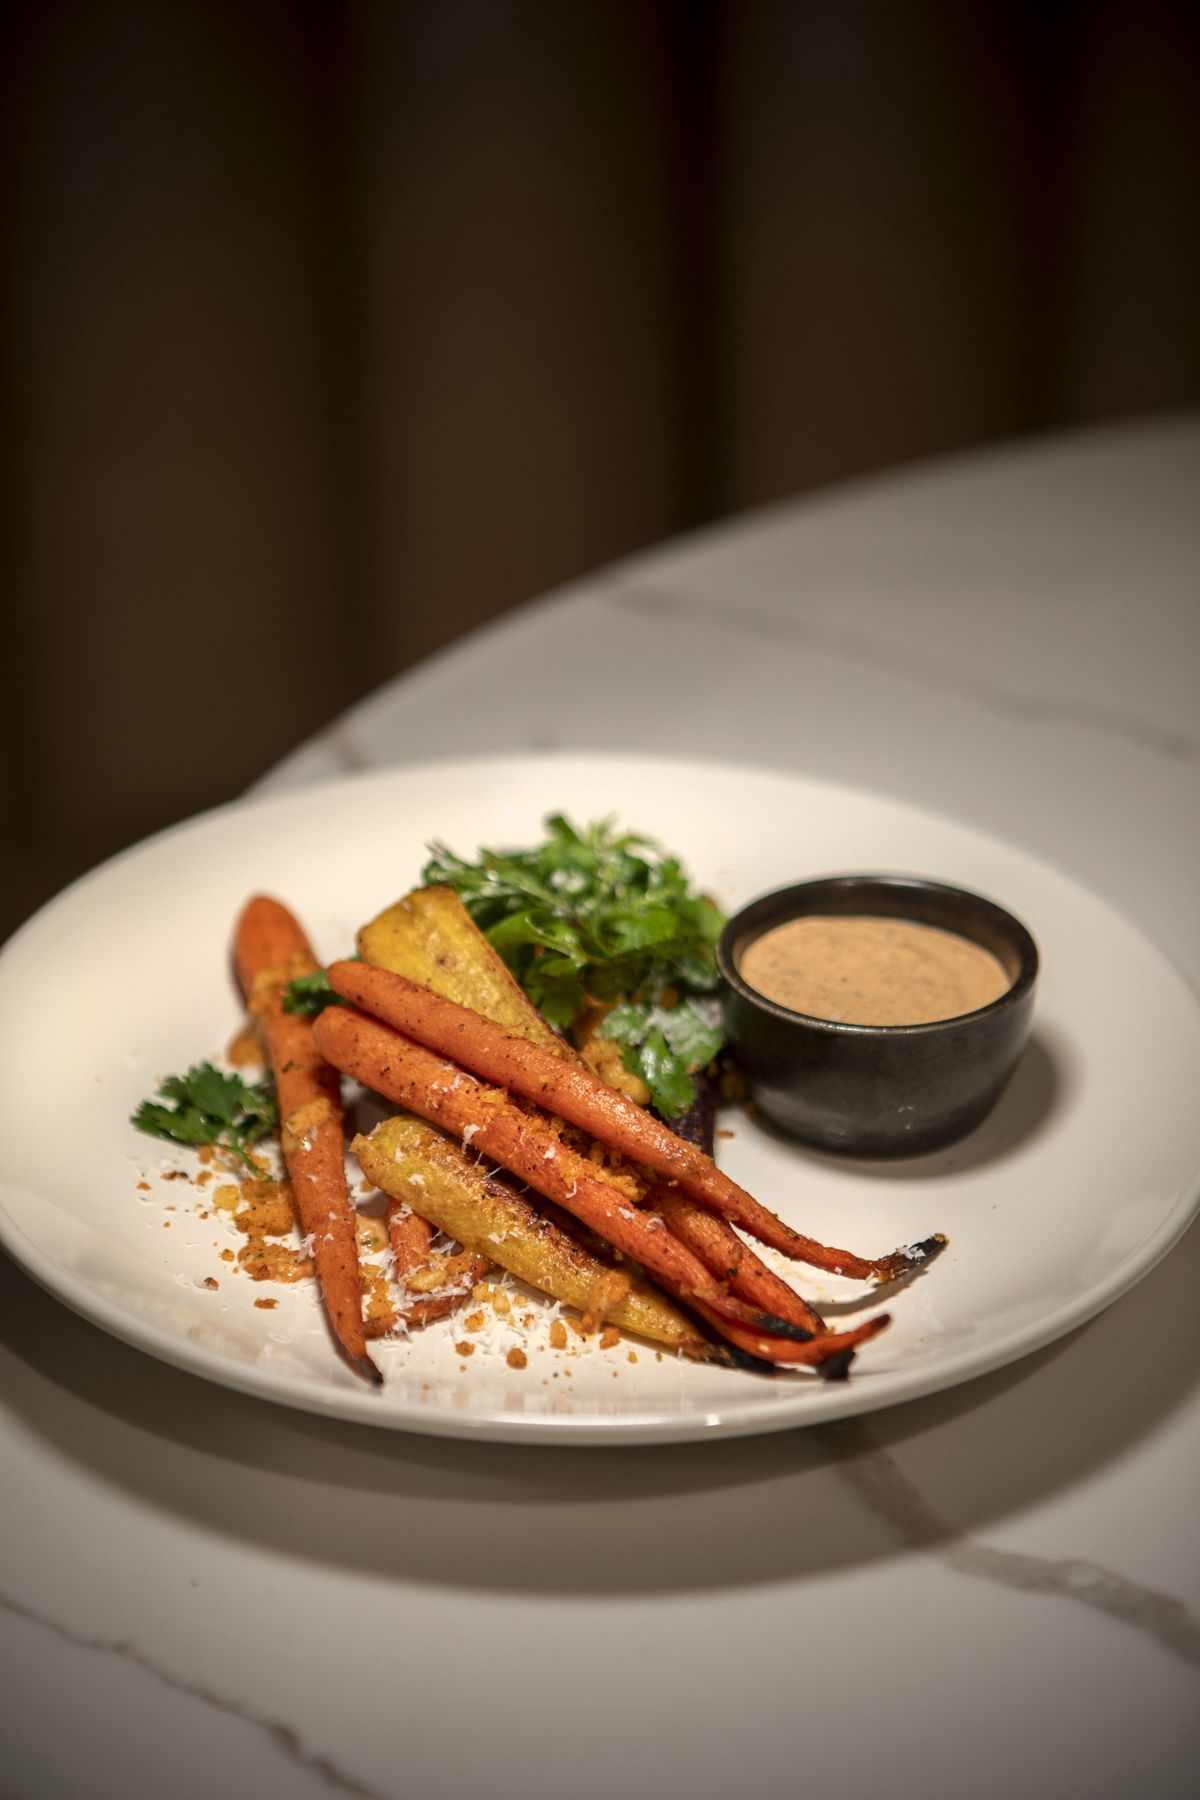 Roasted carrots at Alice B. restaurant in Palm Springs, California.